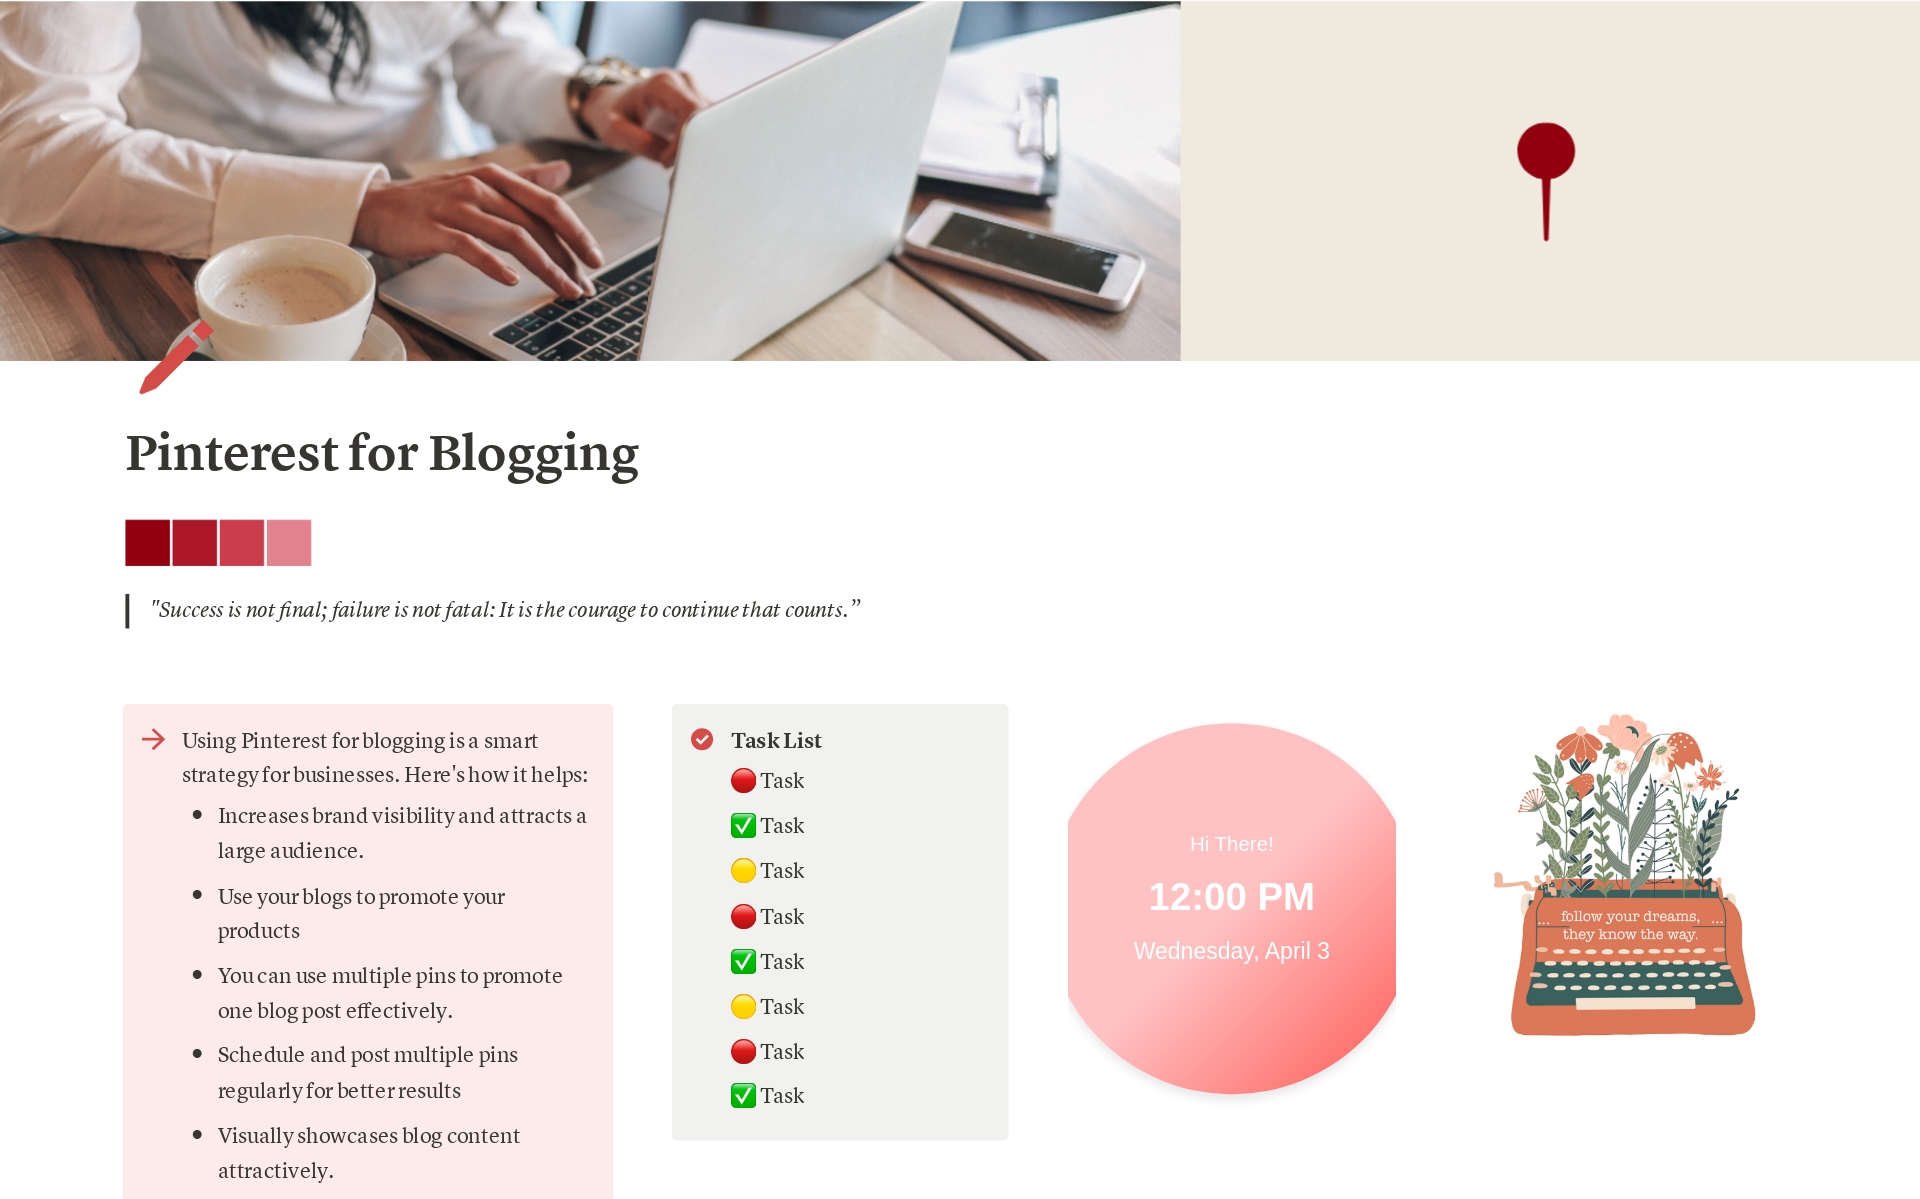 Promote your blogs on Pinterest to bring more traffic to your business